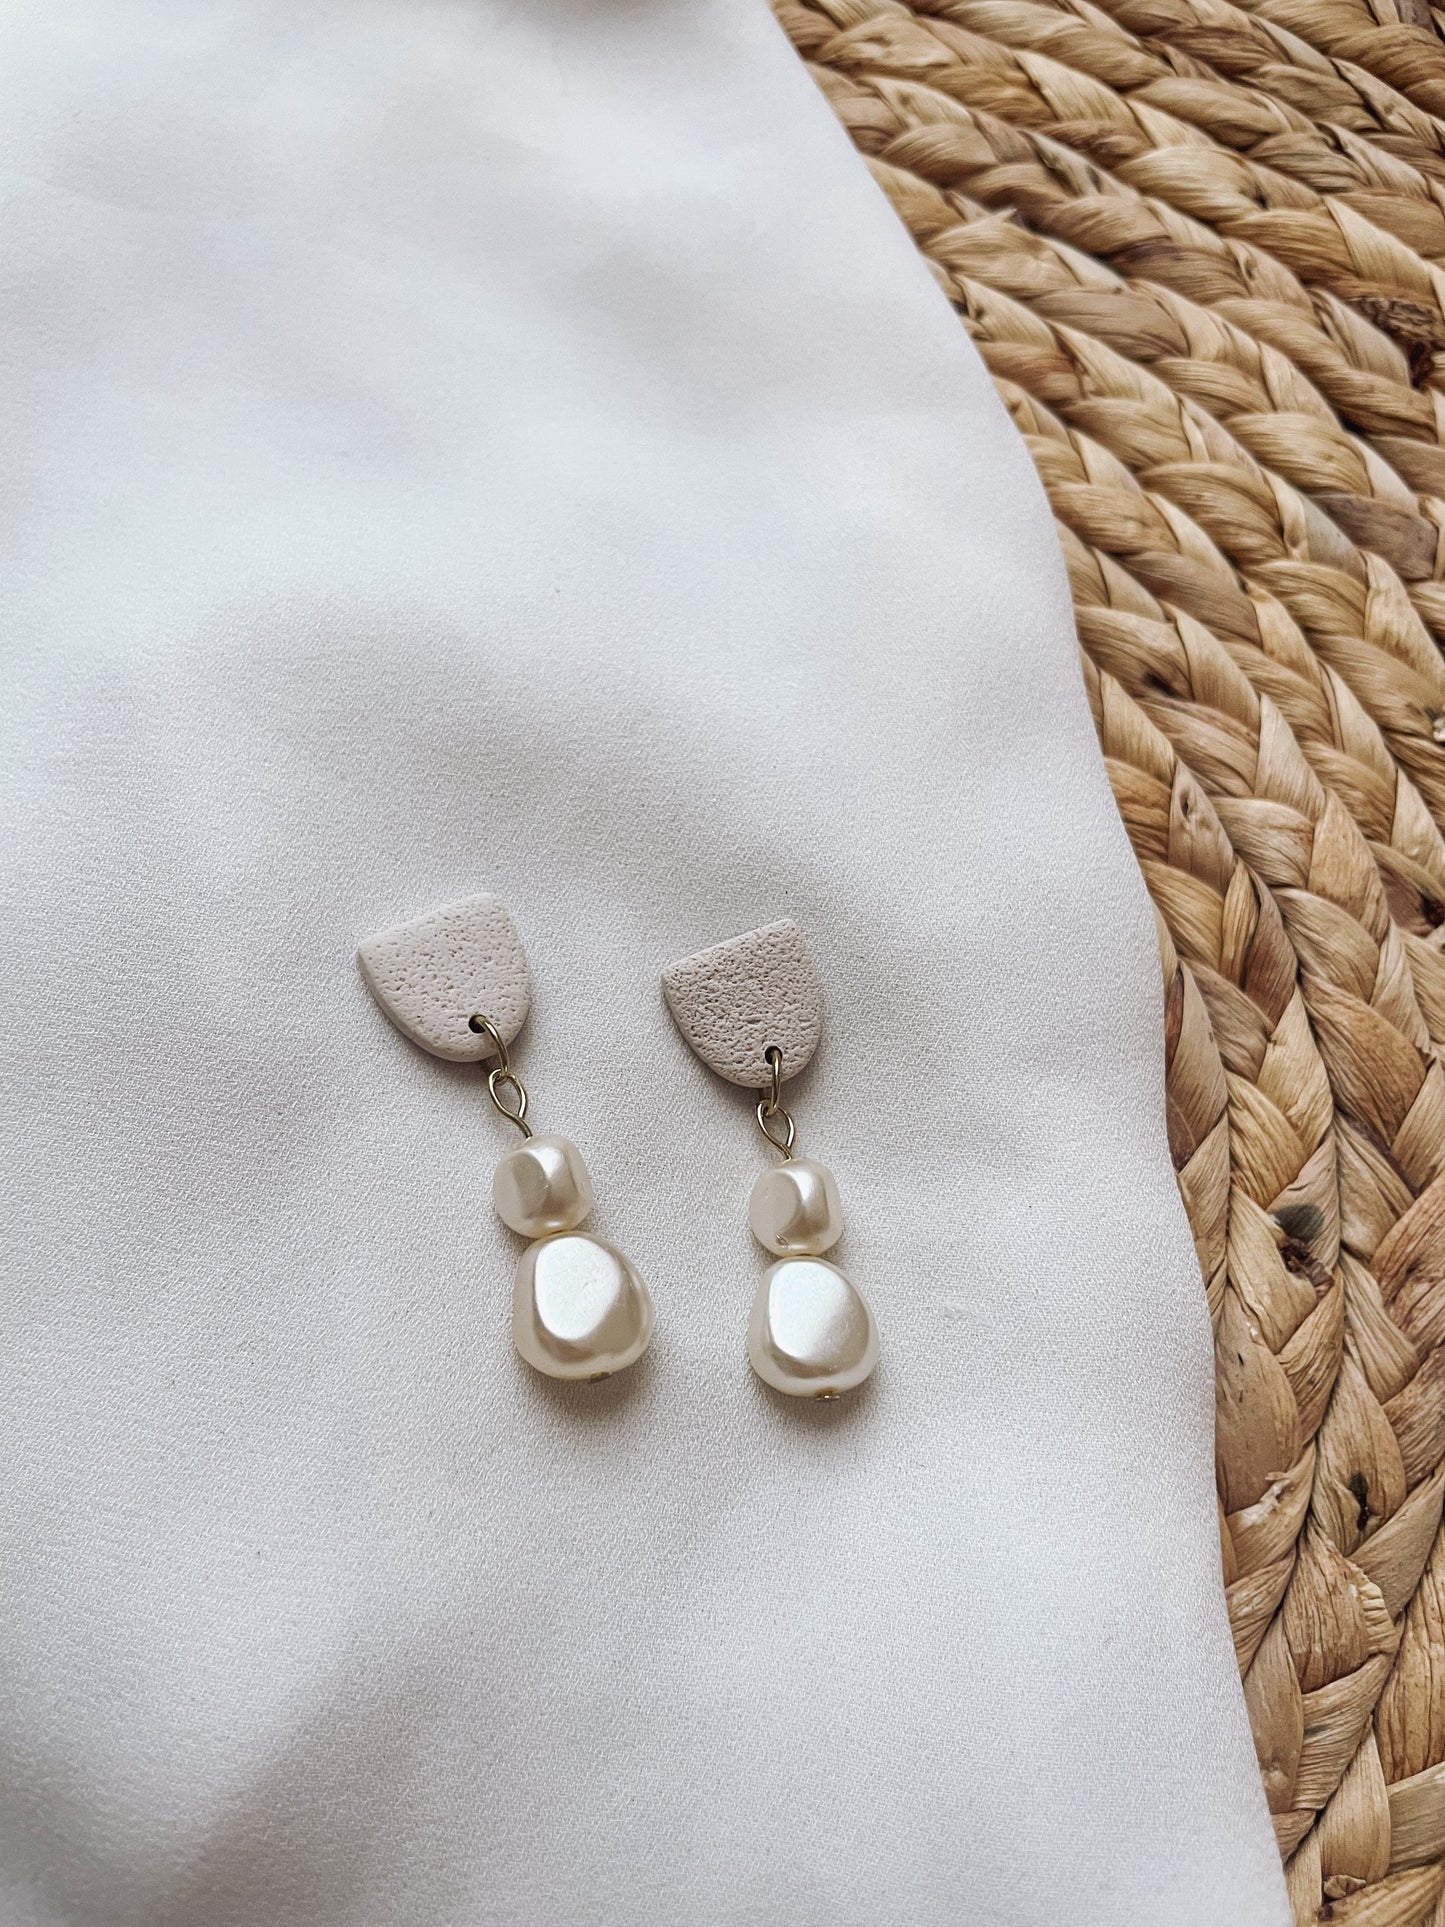 Mini Neutral Earrings with Pearl Accents